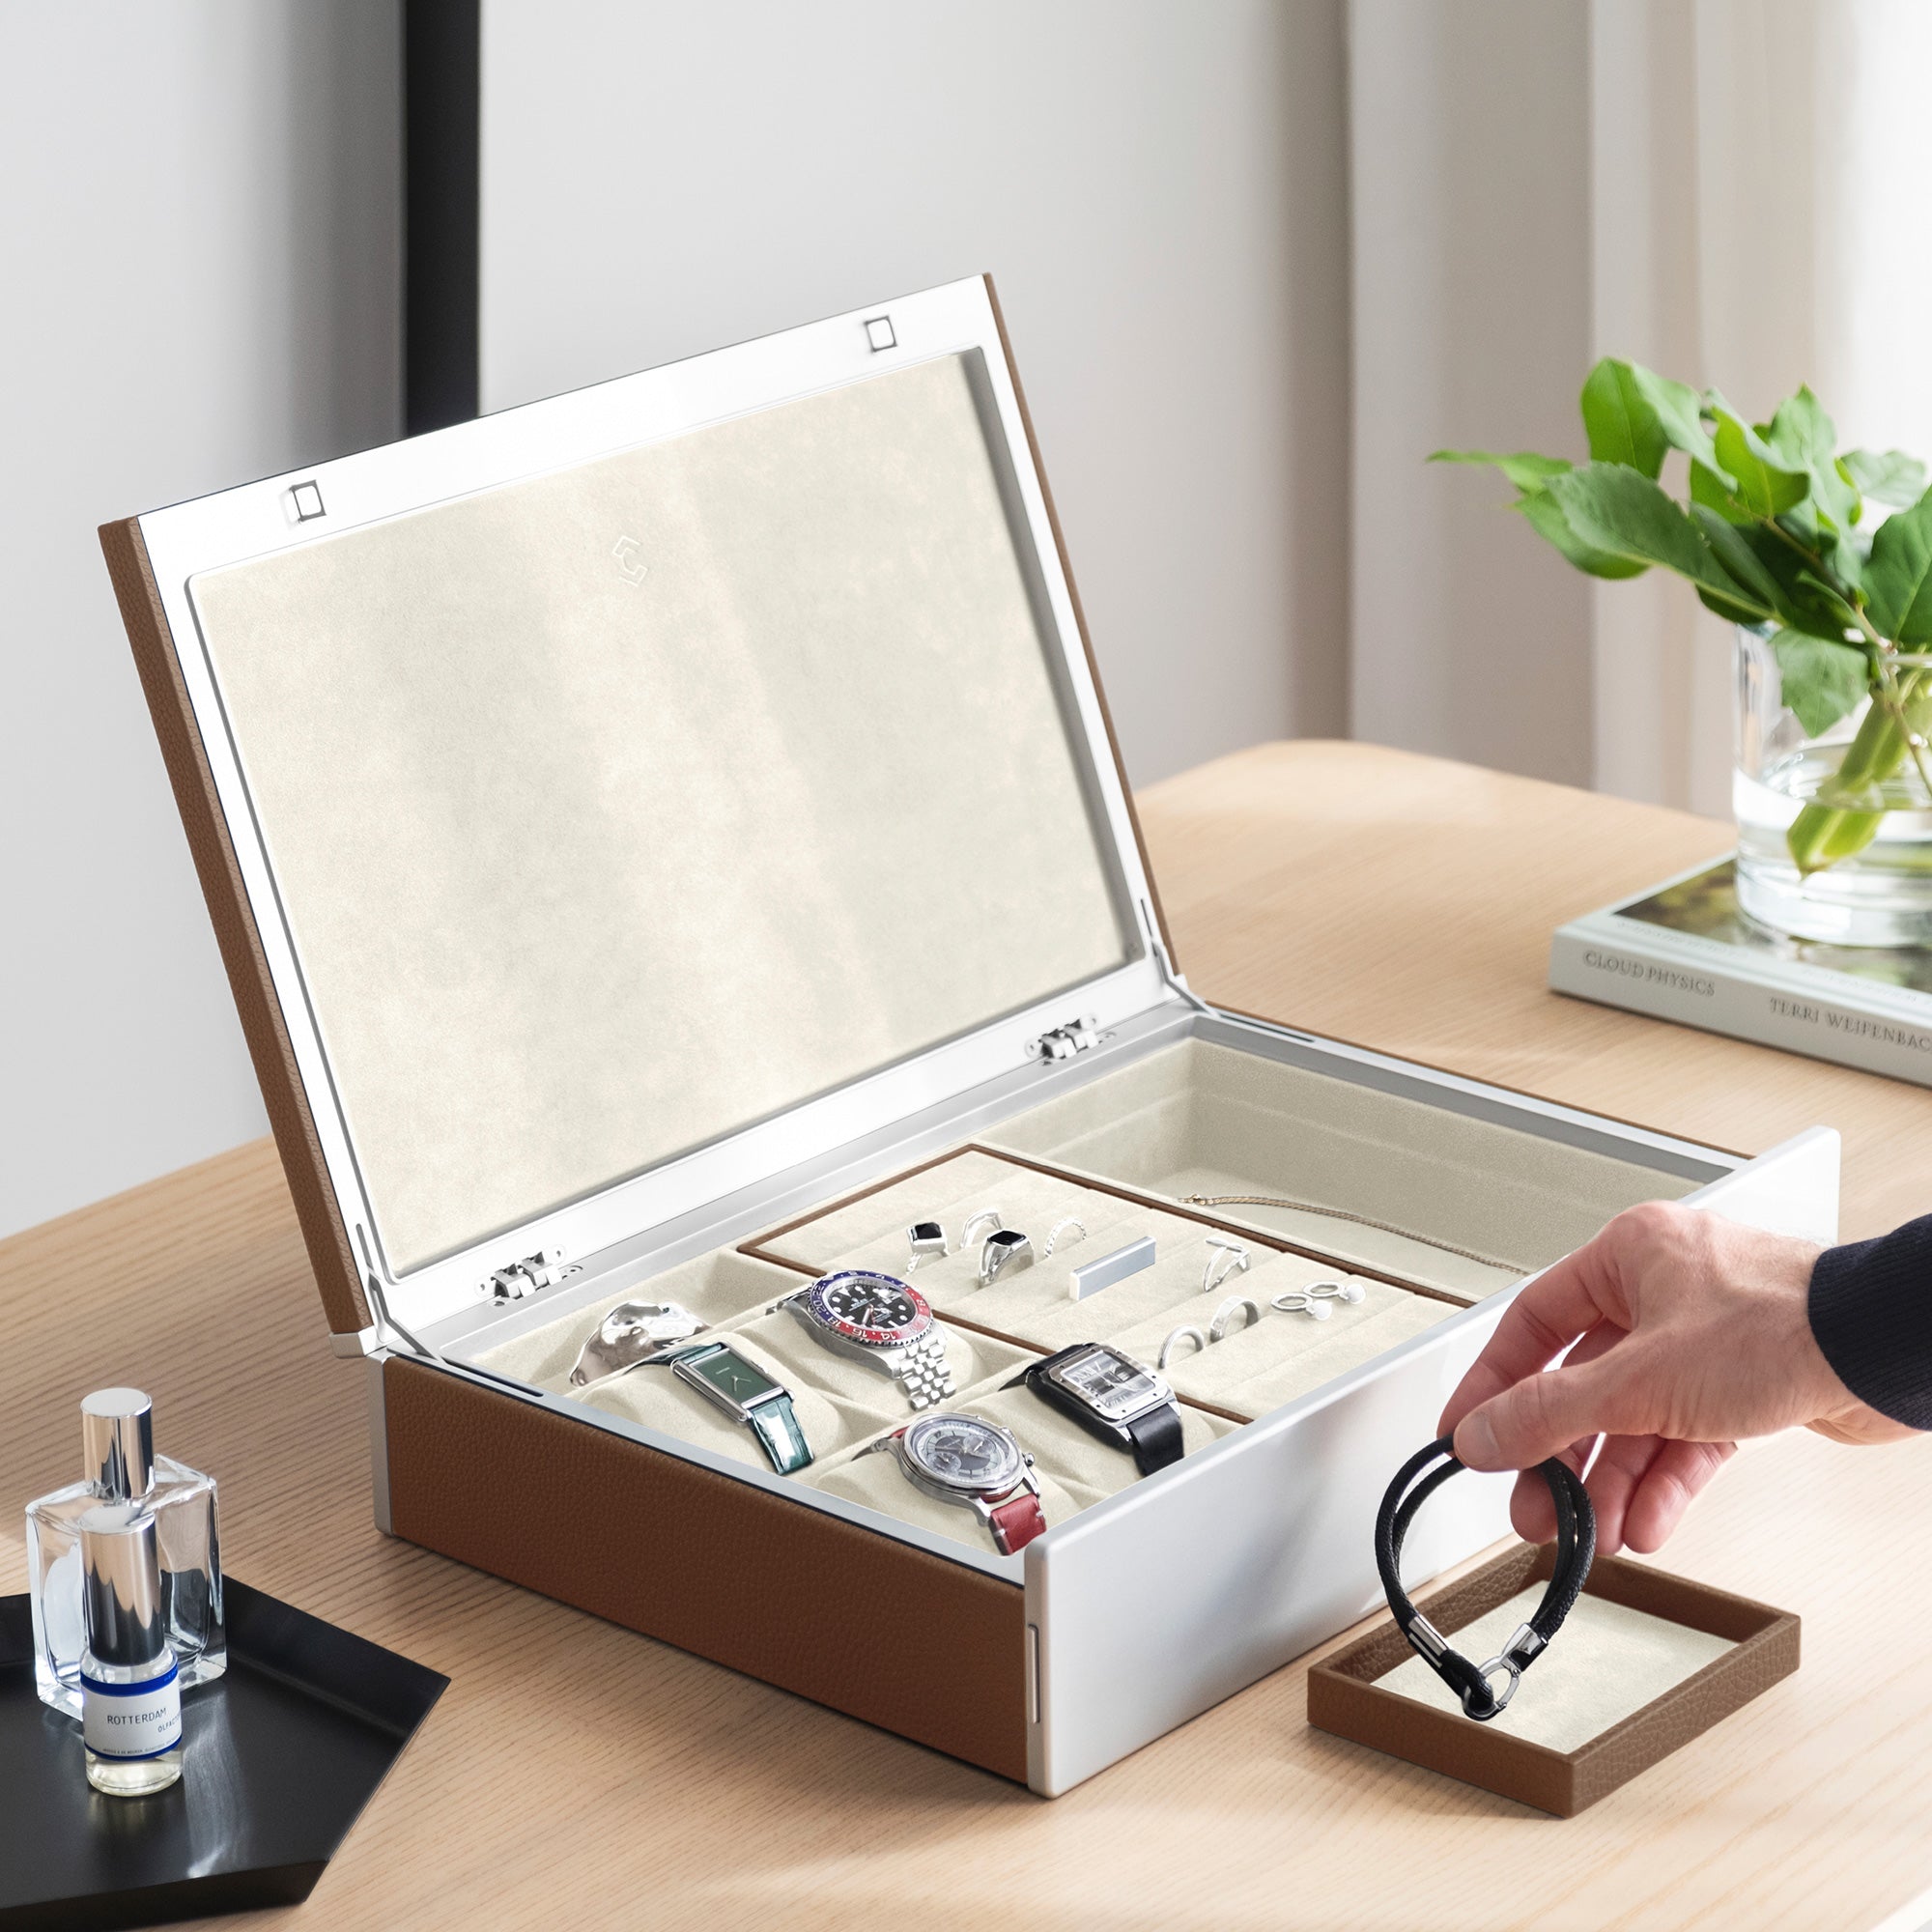 Lifestyle photo of man grabbing bracelet from the jewelry tray of the Taylor 4 Watch and Jewelry box. The jewelry organization and watch storage box is holding 4 luxury watches and a collection of rings, earrings and necklaces.